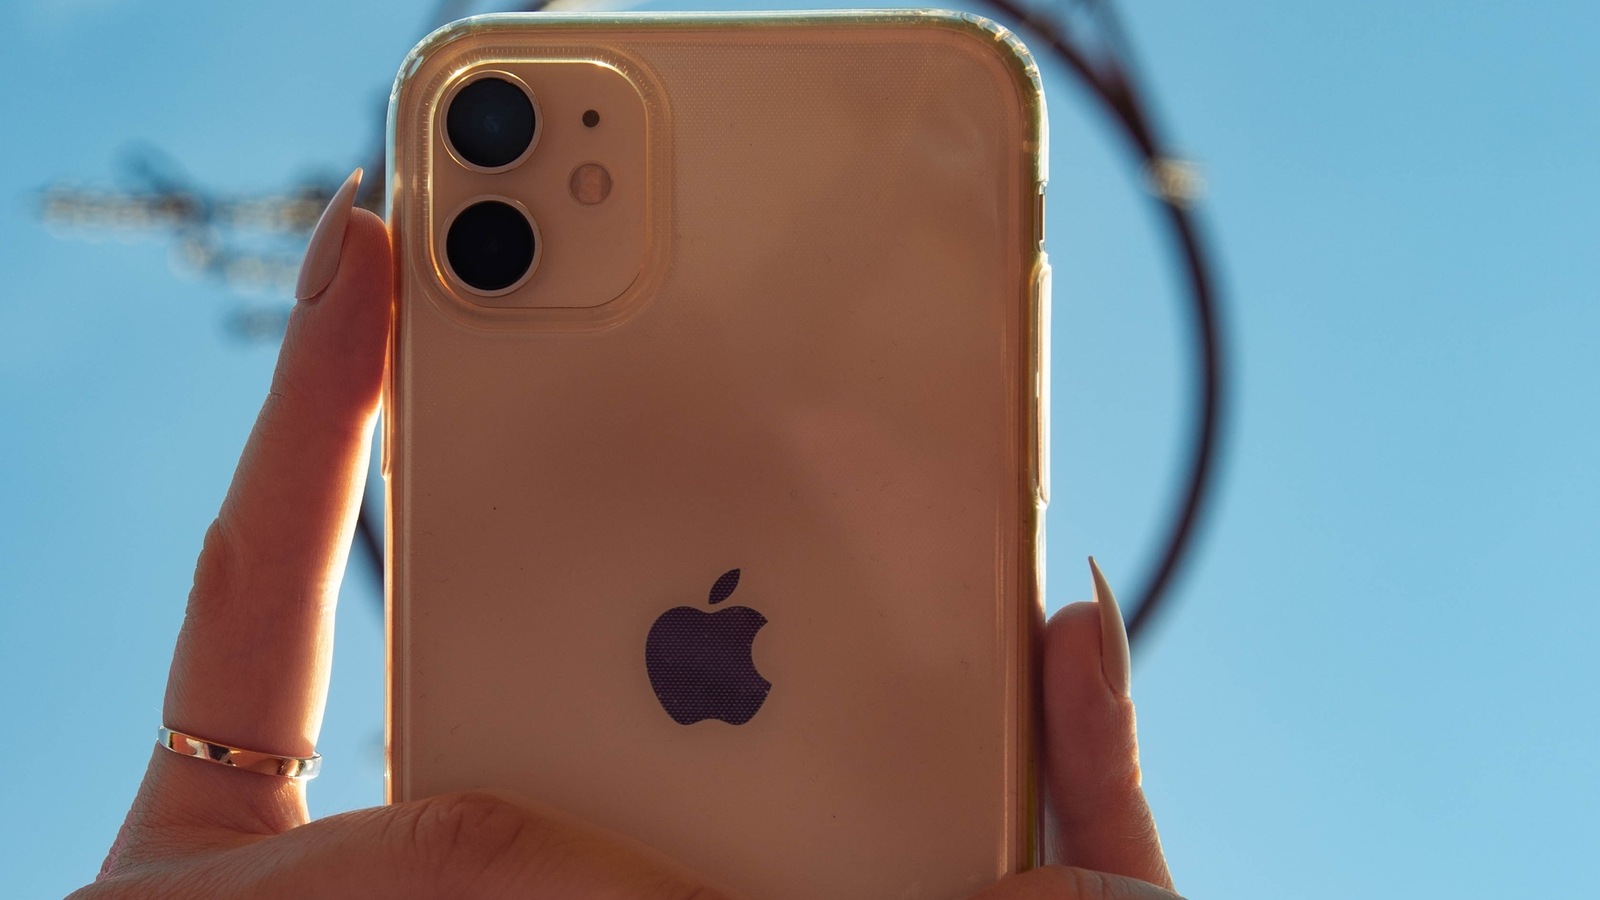 iPhone 11 Price: Apple iPhone 11 now available at 21499, check out these  deals here - The Economic Times